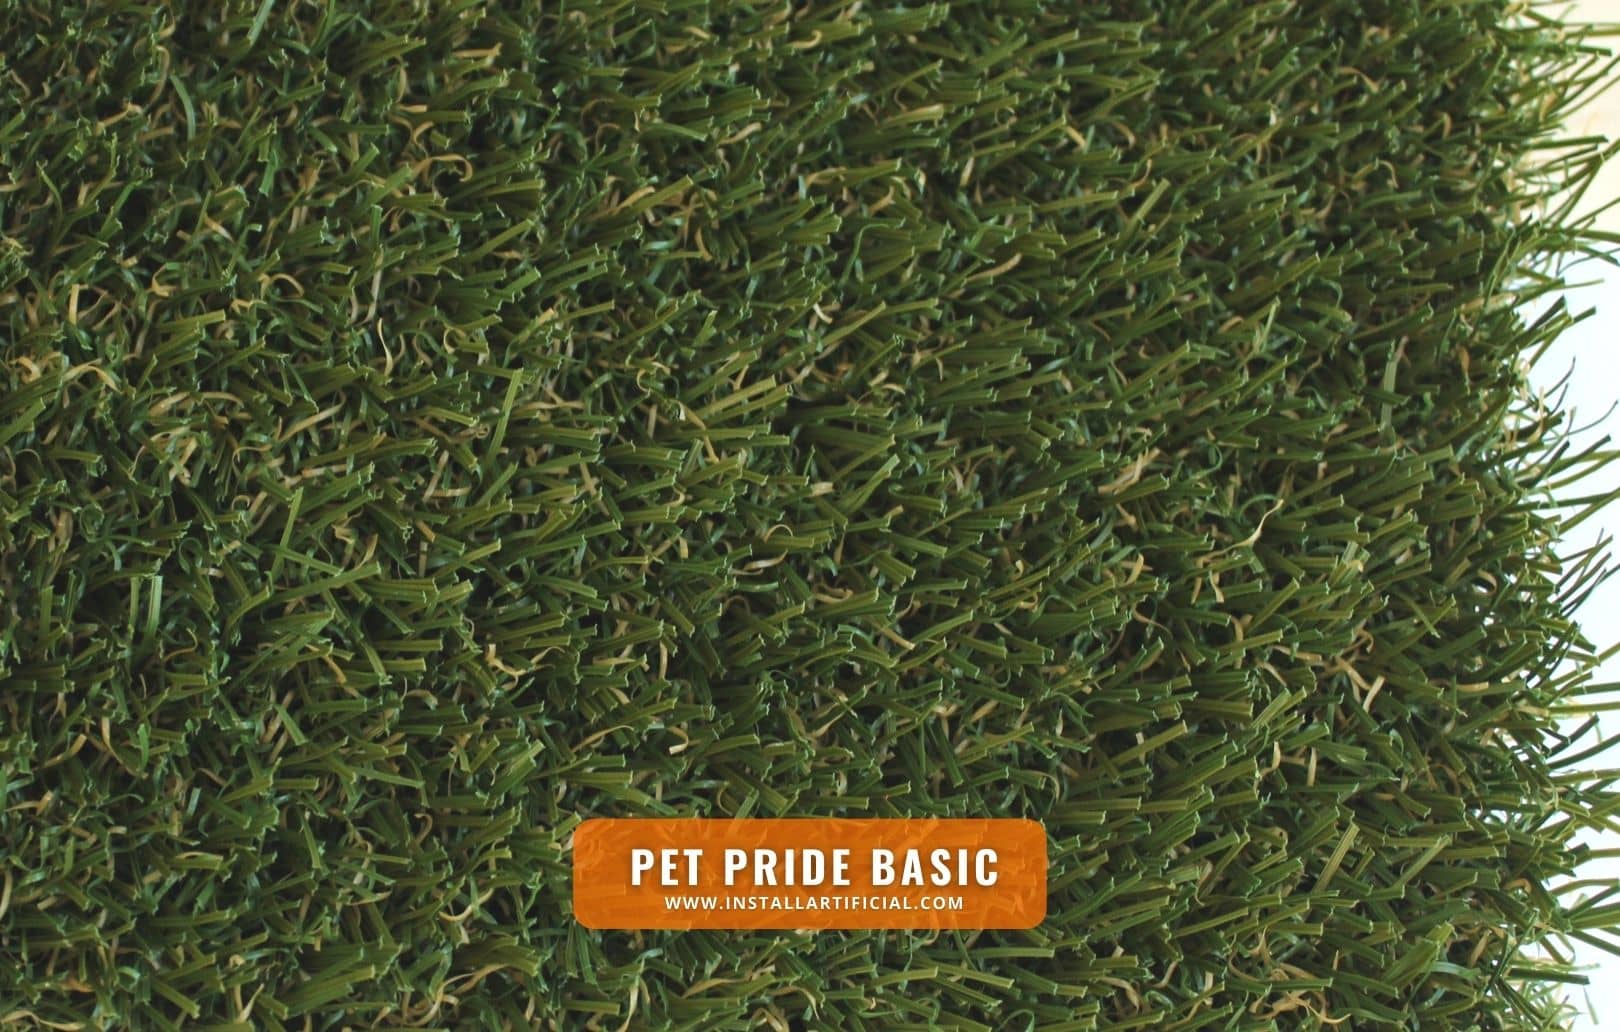 Pet Pride Basic, Imperial Synthetic Turf, top